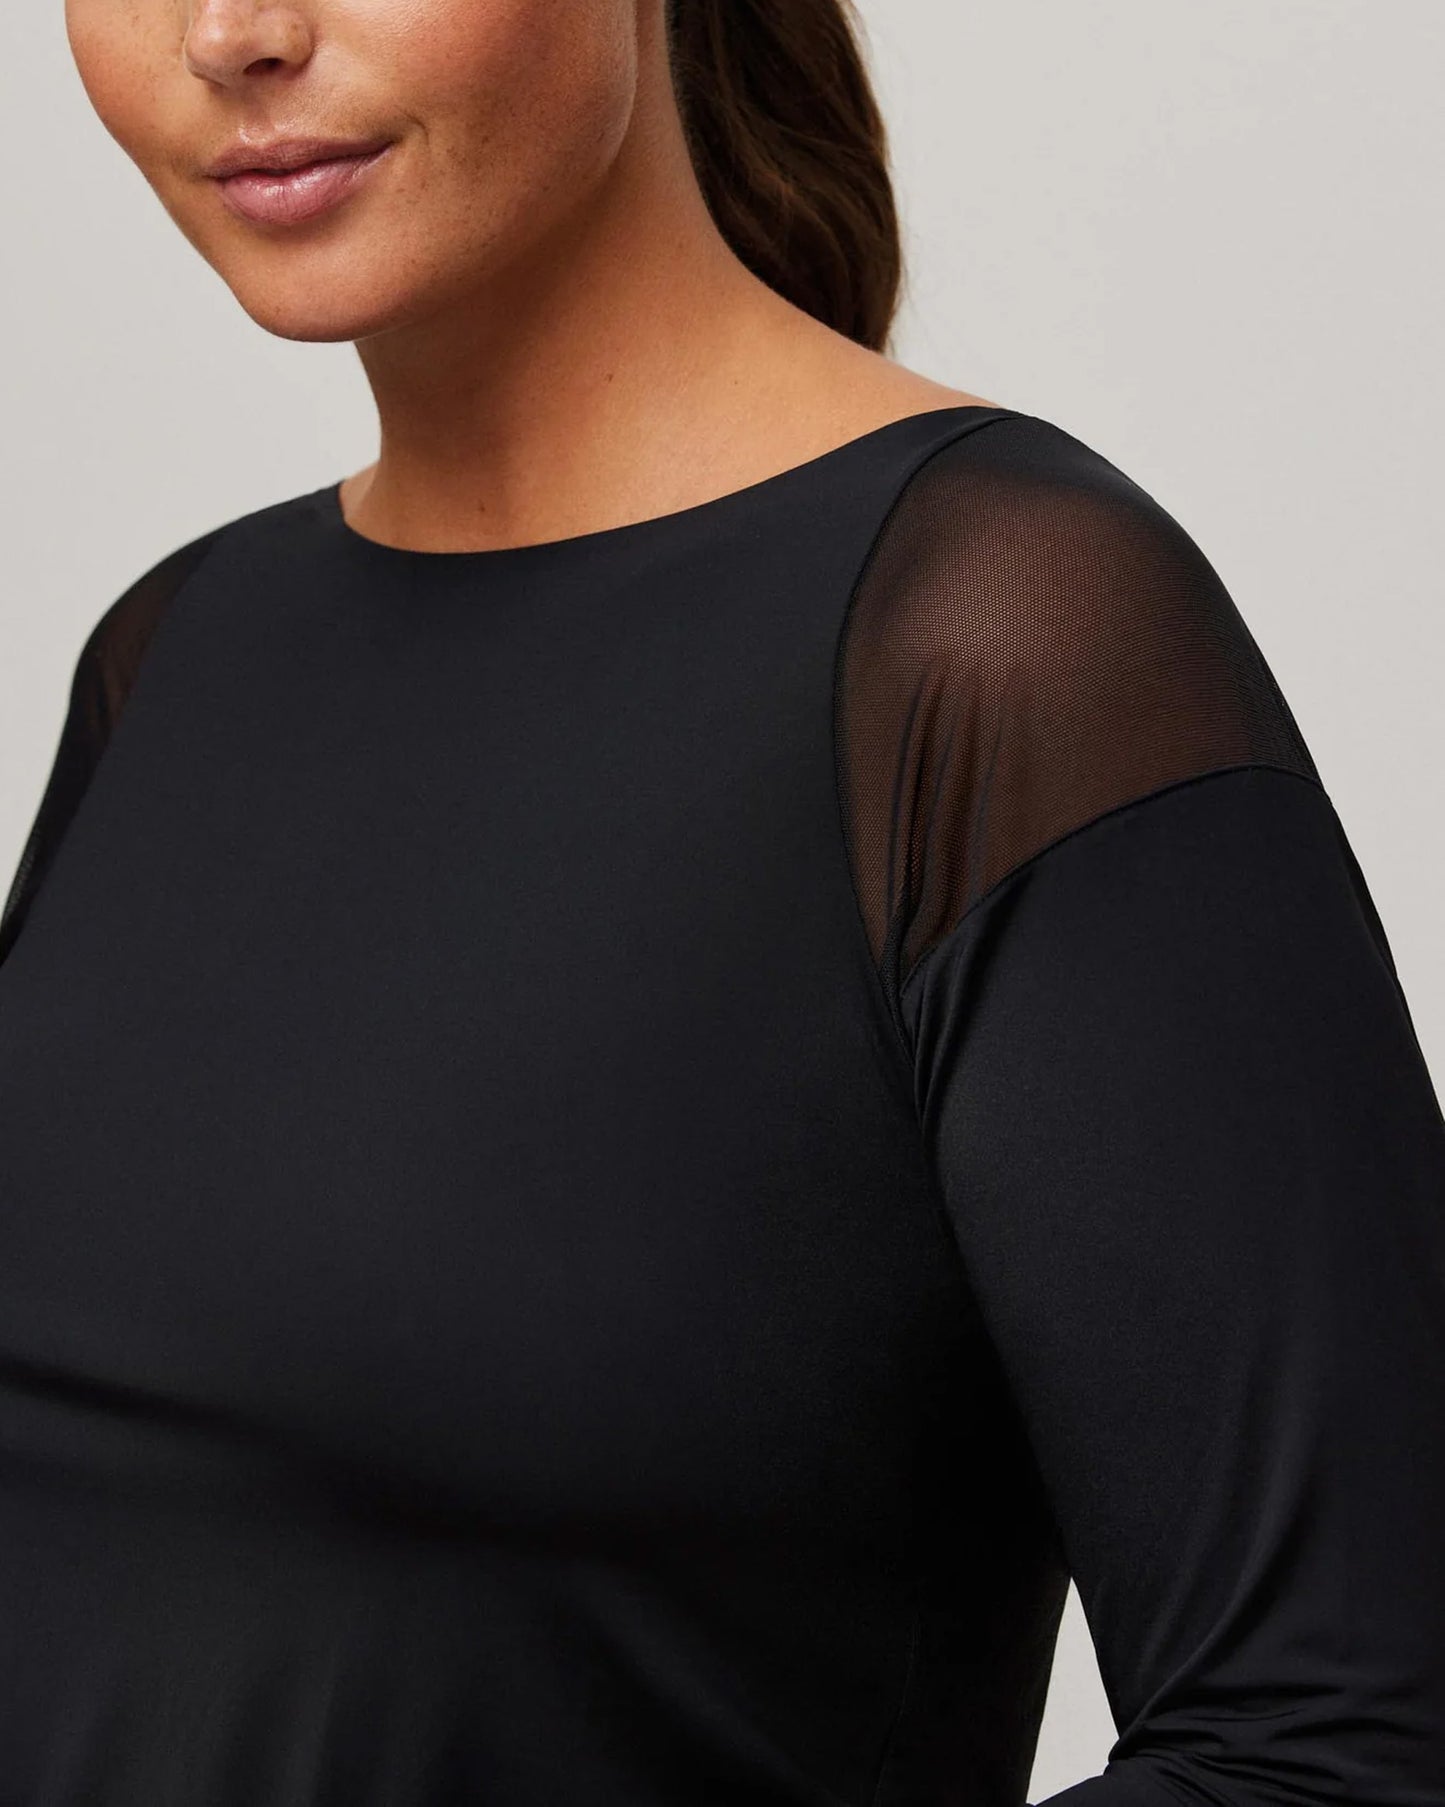 Ysabel Mora 10054 Tulle Shoulder Top - Slinky and stretchy black long sleeved top with sheer mesh panels on the shoulder and straight neck line.